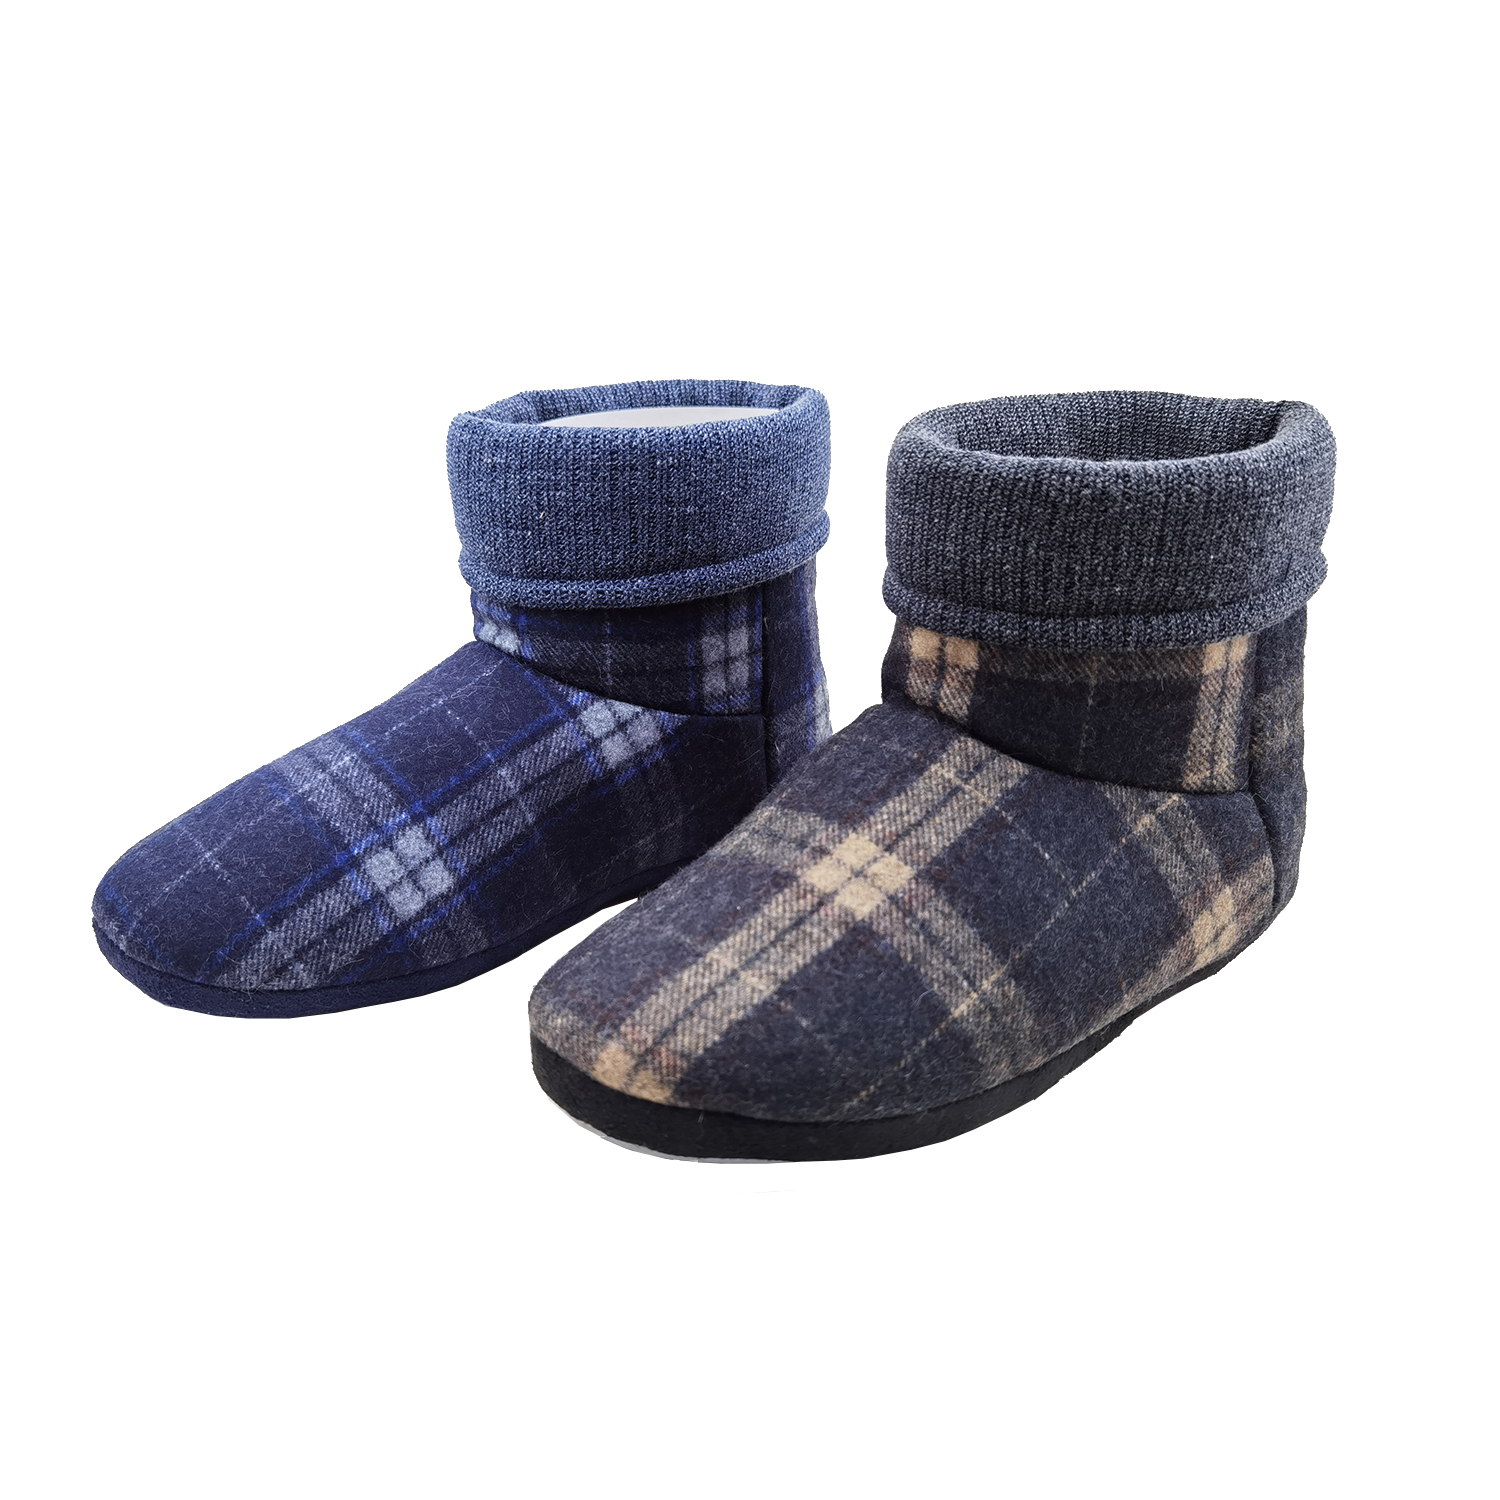 Top Indoor Slippers Manufacturer Reveals Latest Trends and Designs